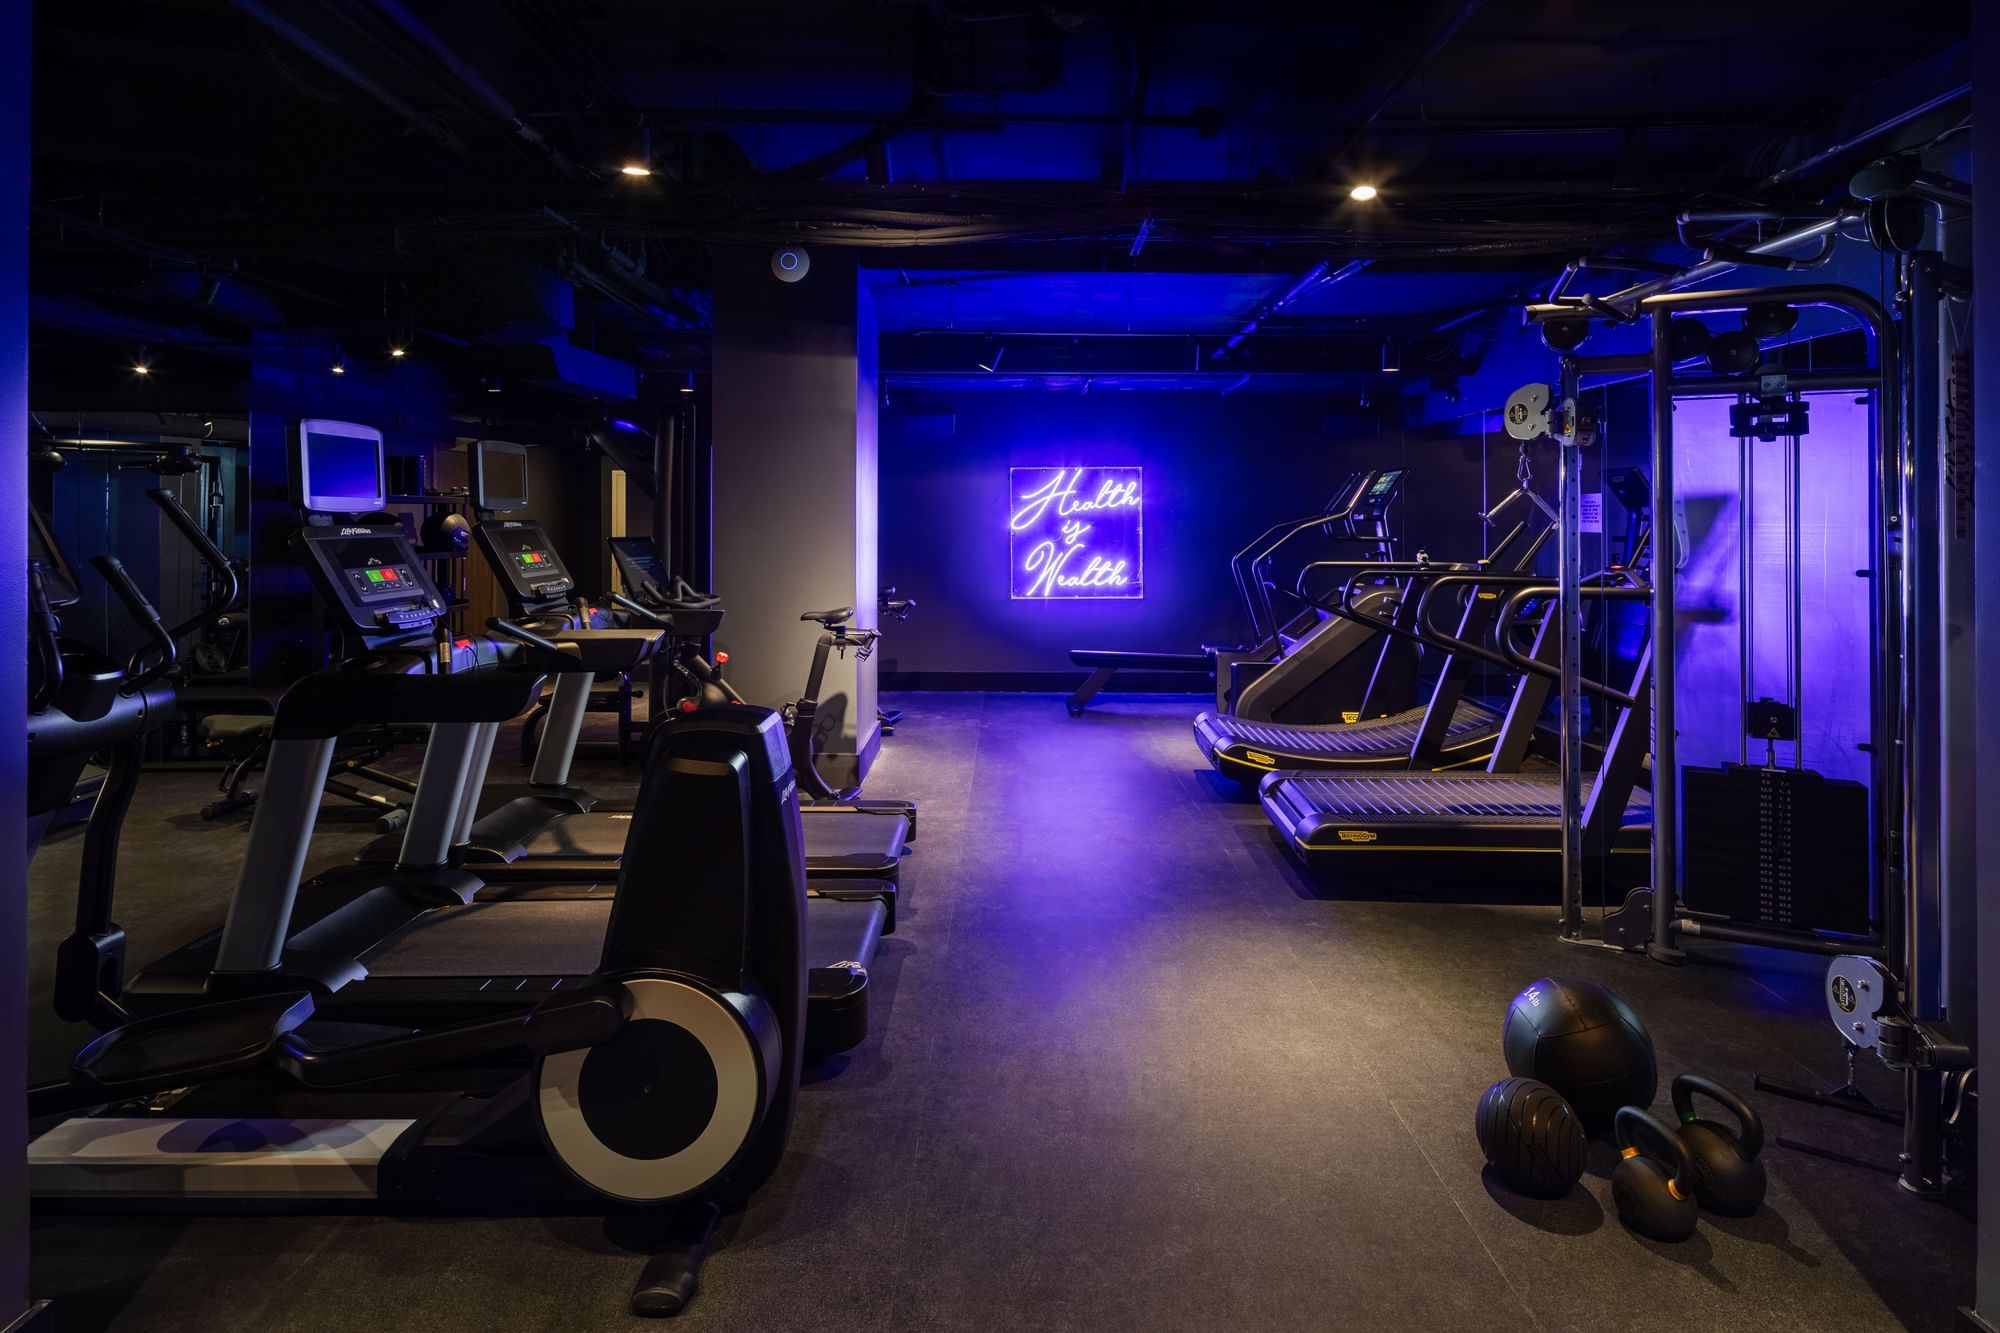 The Fitness Center with Peloton bikes, a Lululemon Studio Mirror, weights and treadmill